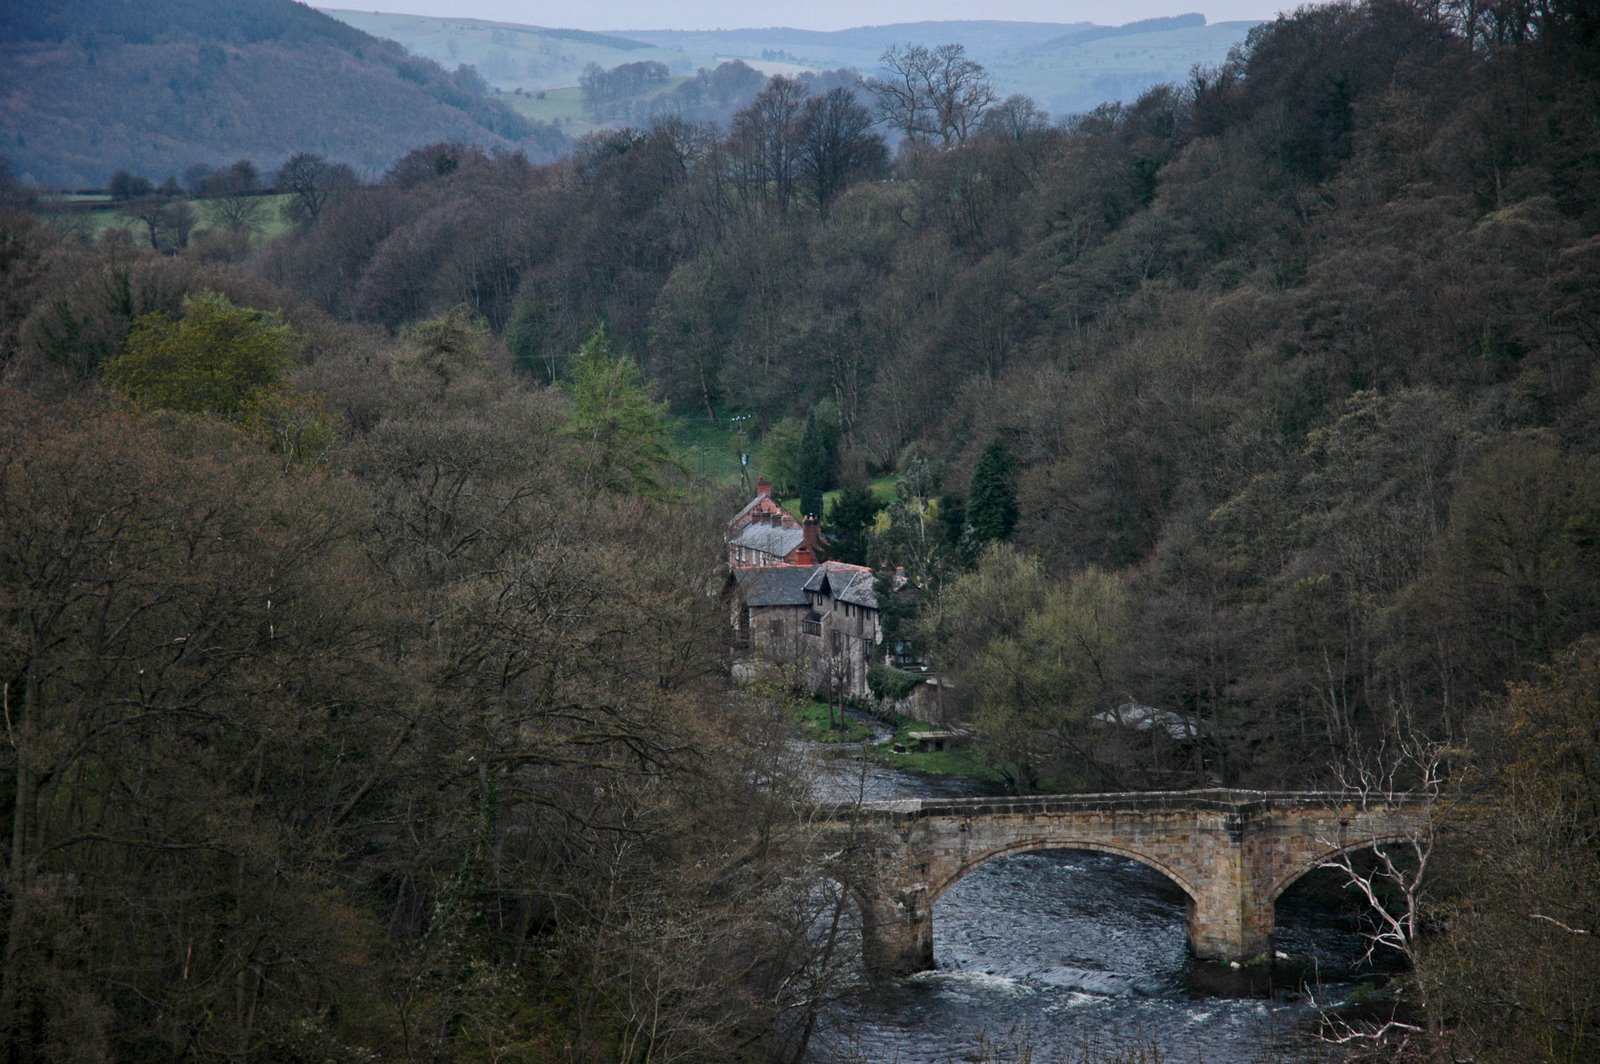 [View+From+pontycylle+Aquaduct.jpg]